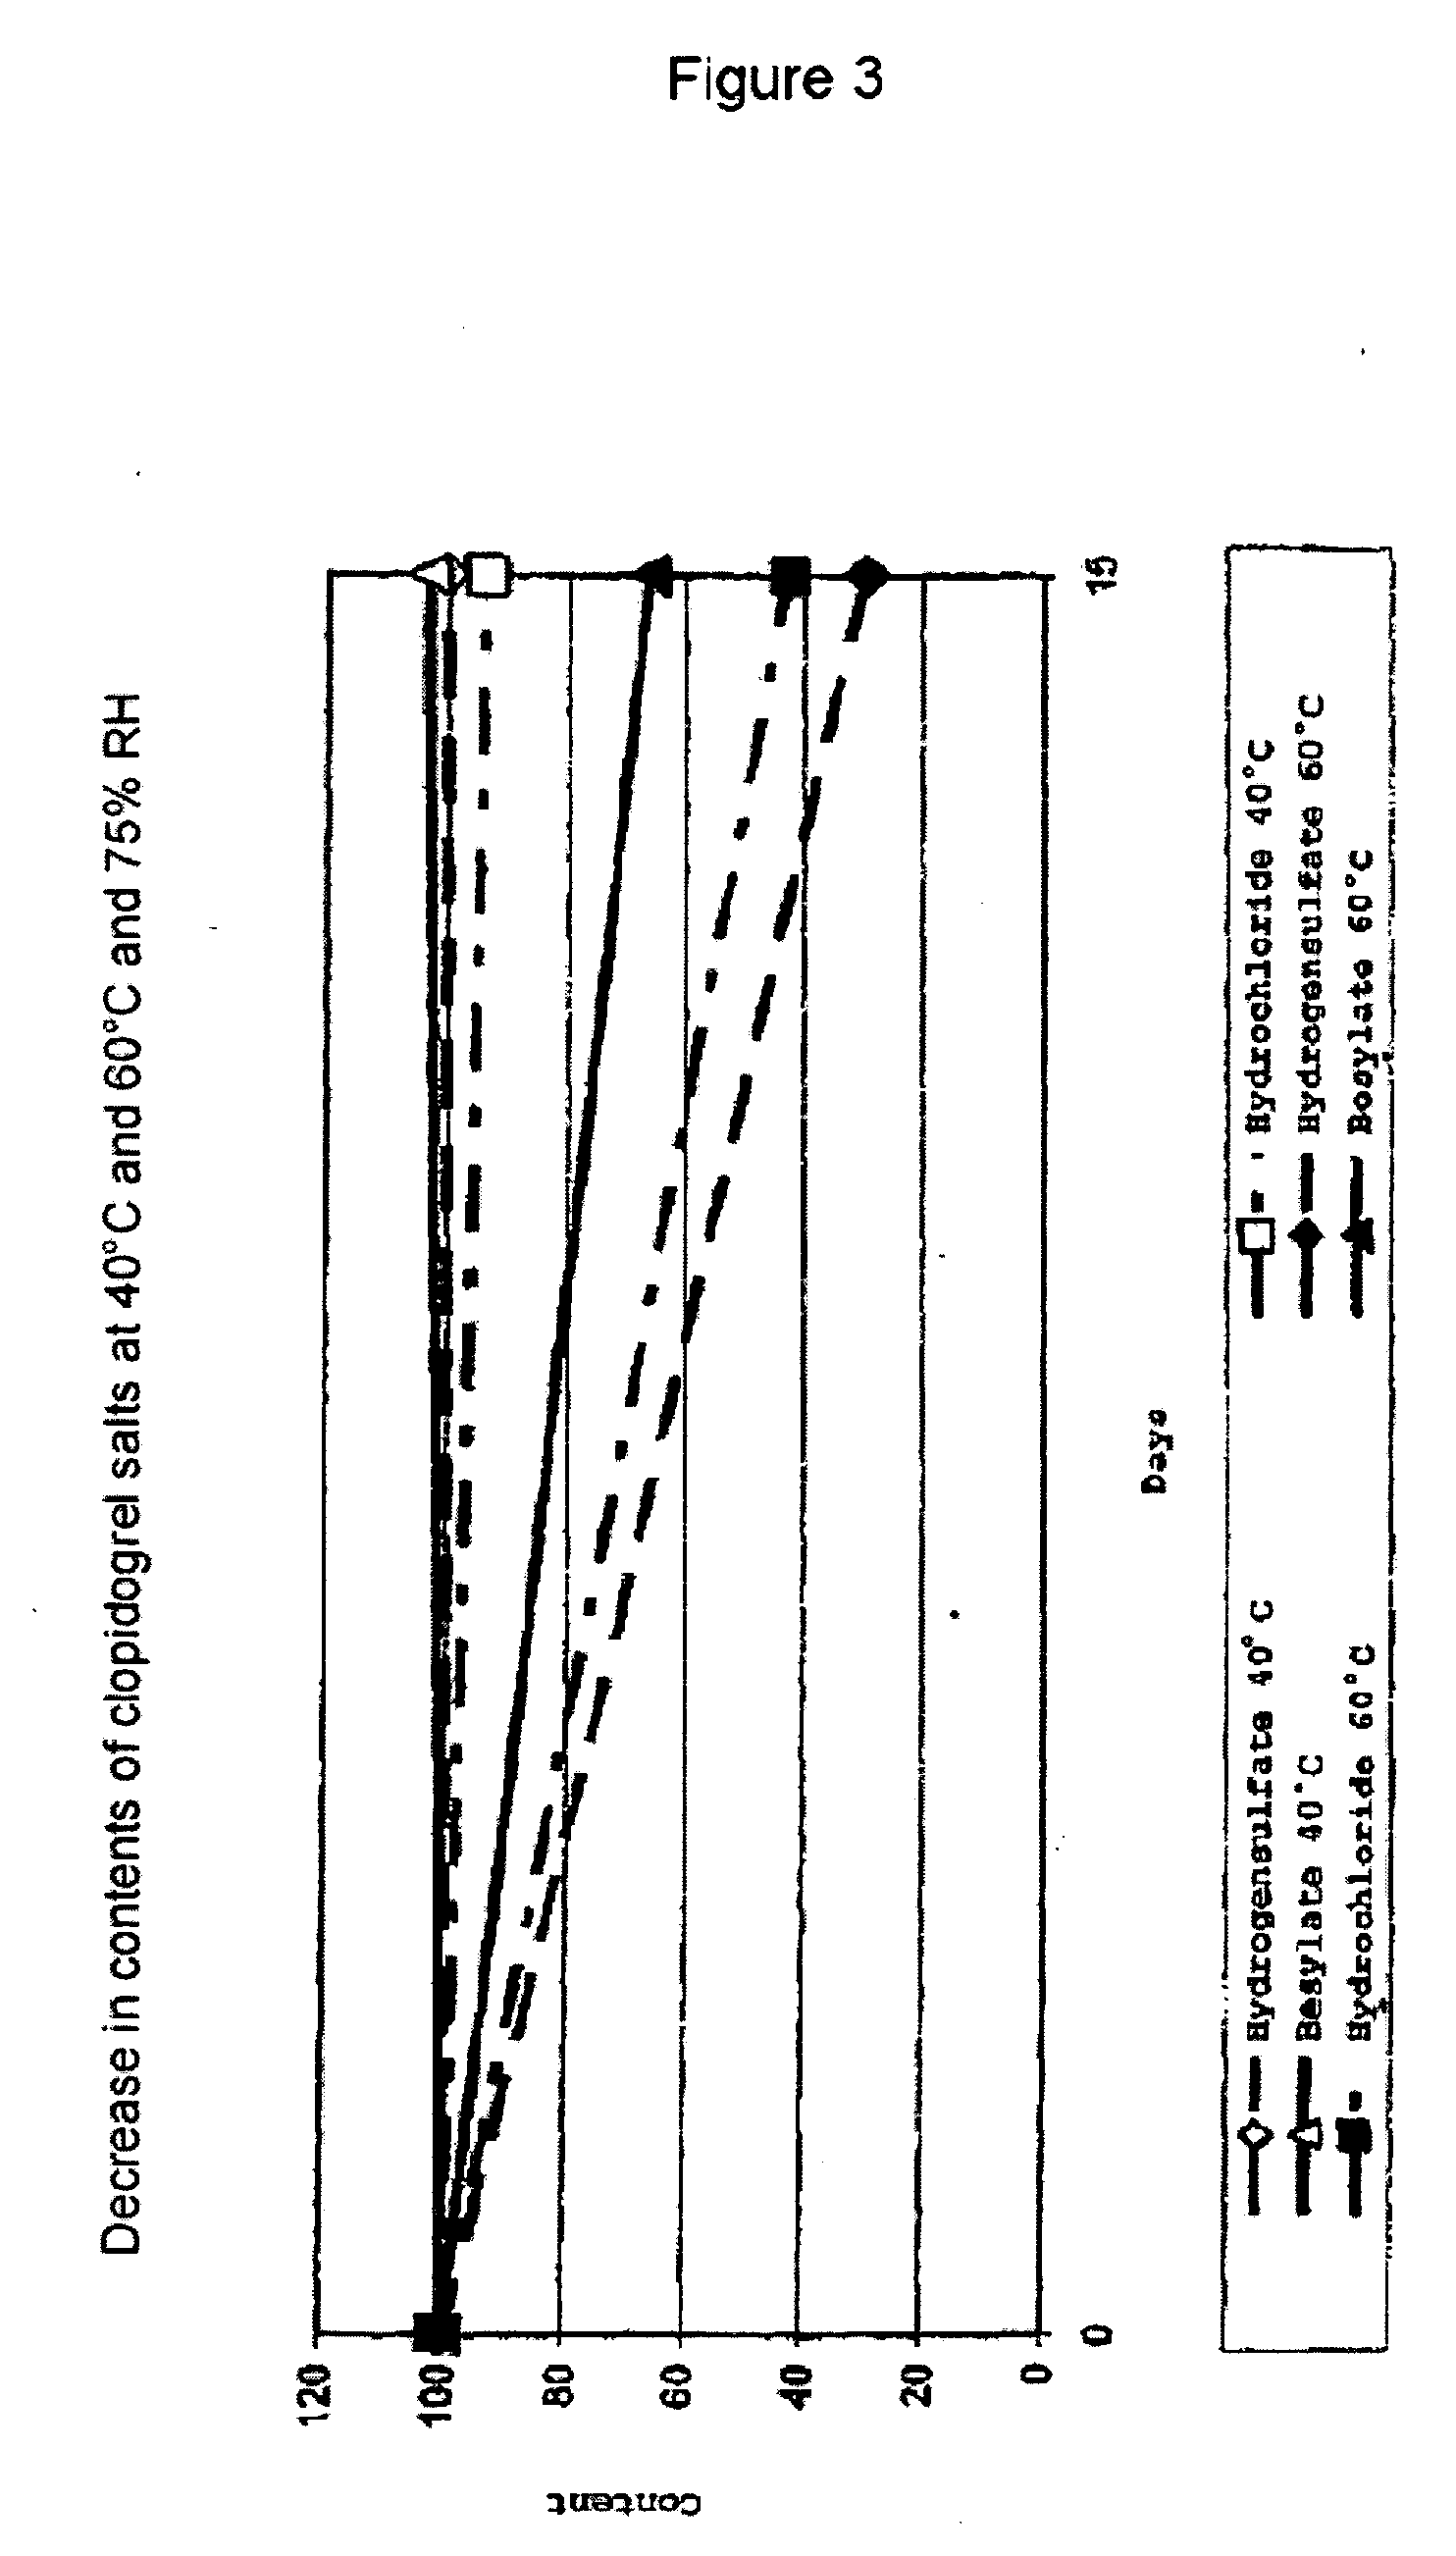 Benzenesulfonic acid salts of clopidogrel, methods for preparing same, and pharmaceutical formulations thereof